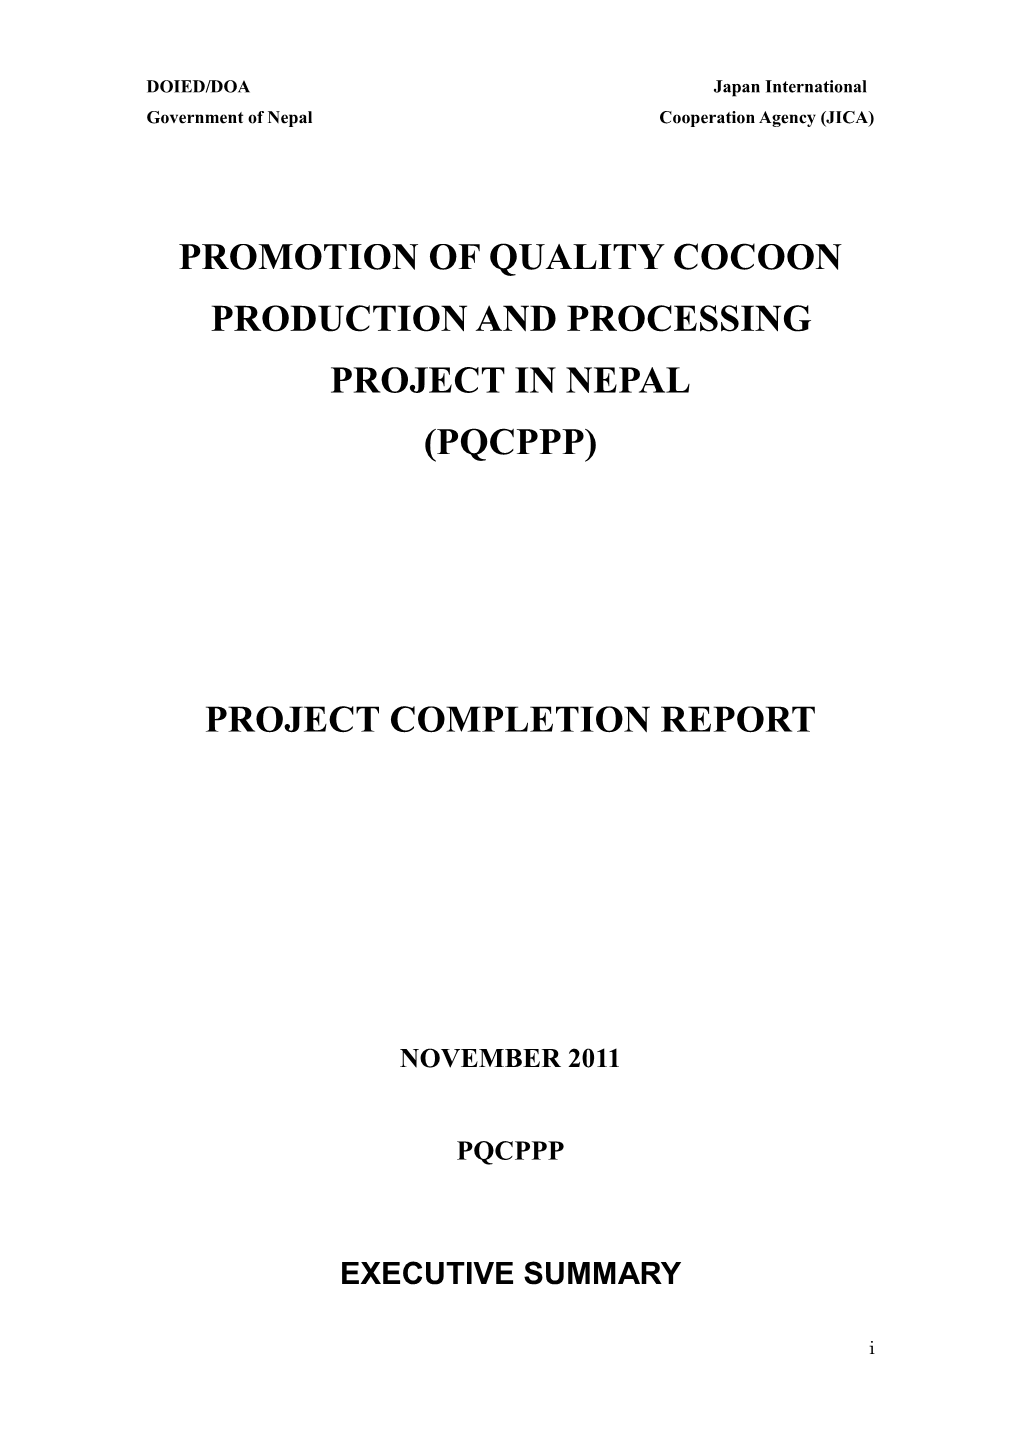 Promotion of Quality Cocoon Production and Processing Project in Nepal (Pqcppp)